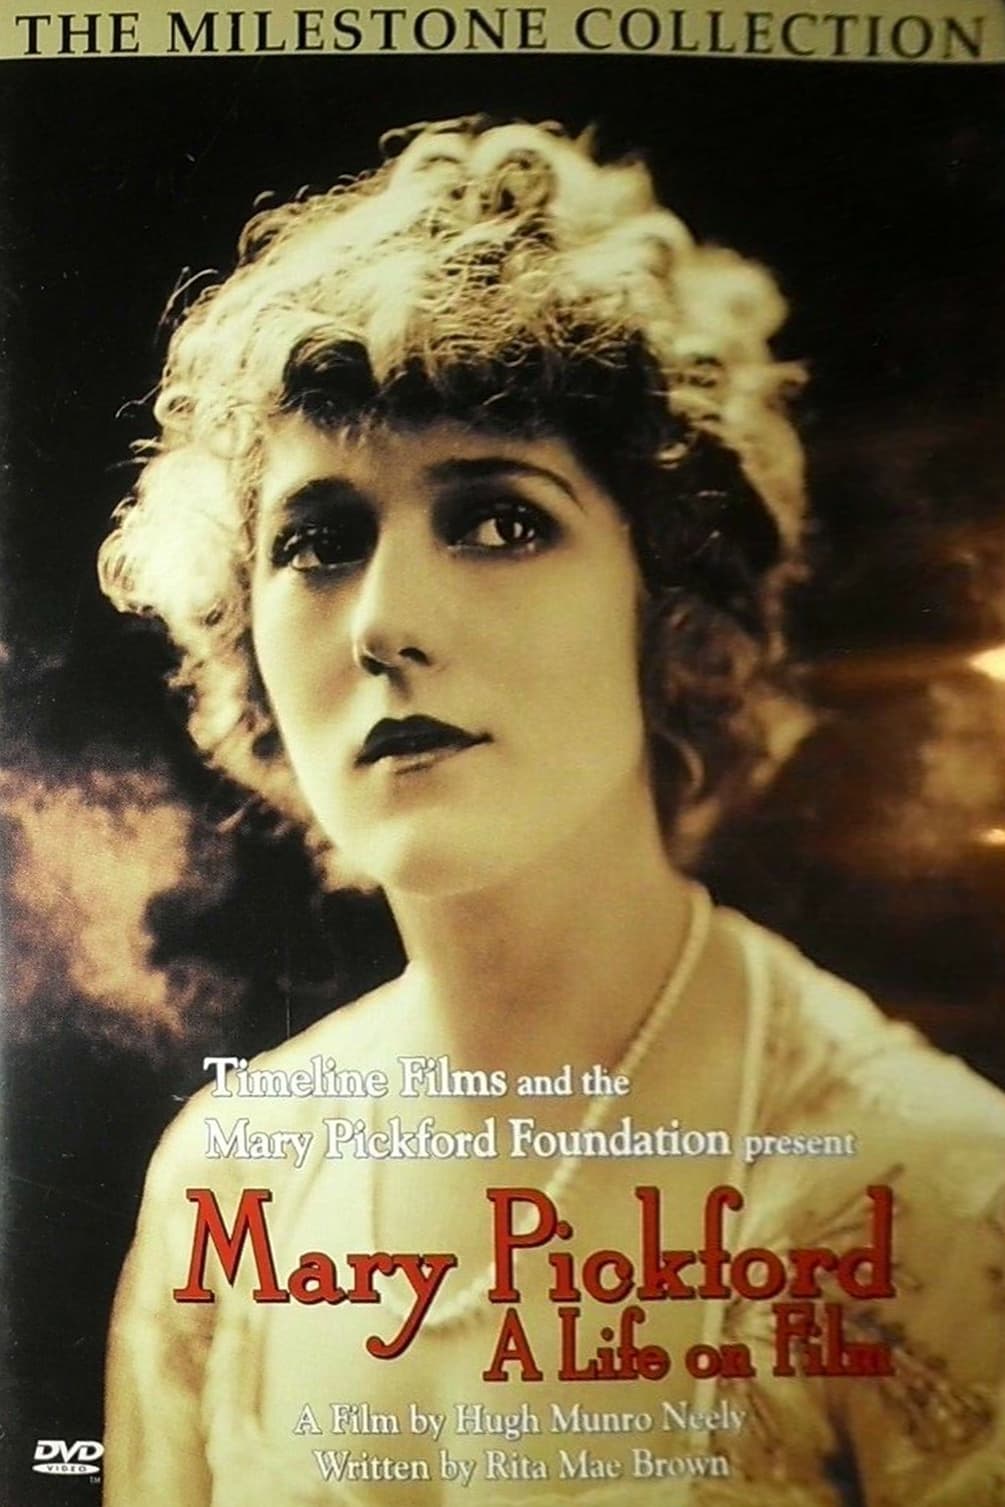 Mary Pickford: A Life on Film (1999)